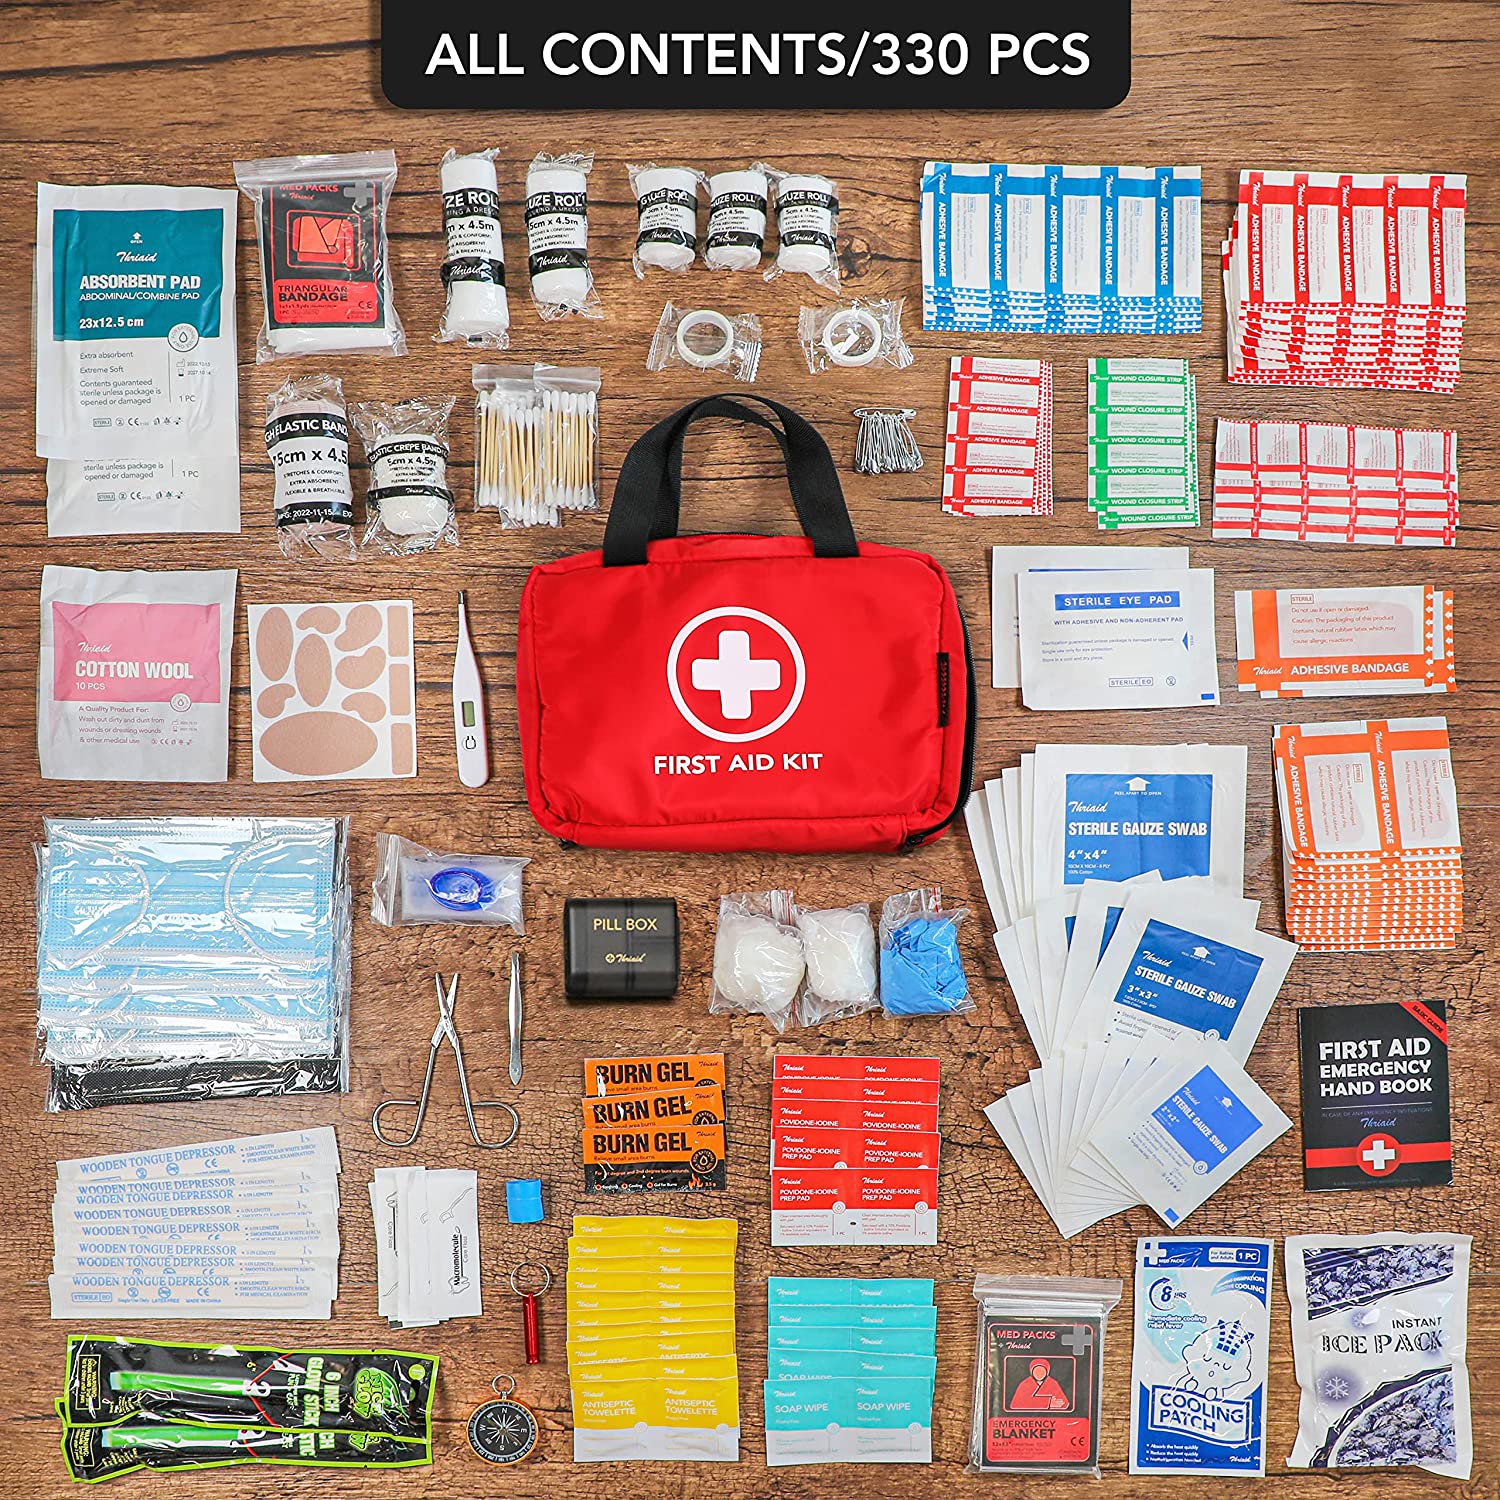  VRIEXSD 400 Piece Large First Aid Kit Premium Emergency Kits  for Home, Office, Car, Outdoor, Hiking, Travel, Camping, Survival Medical  First Aid Bag, Red : Health & Household